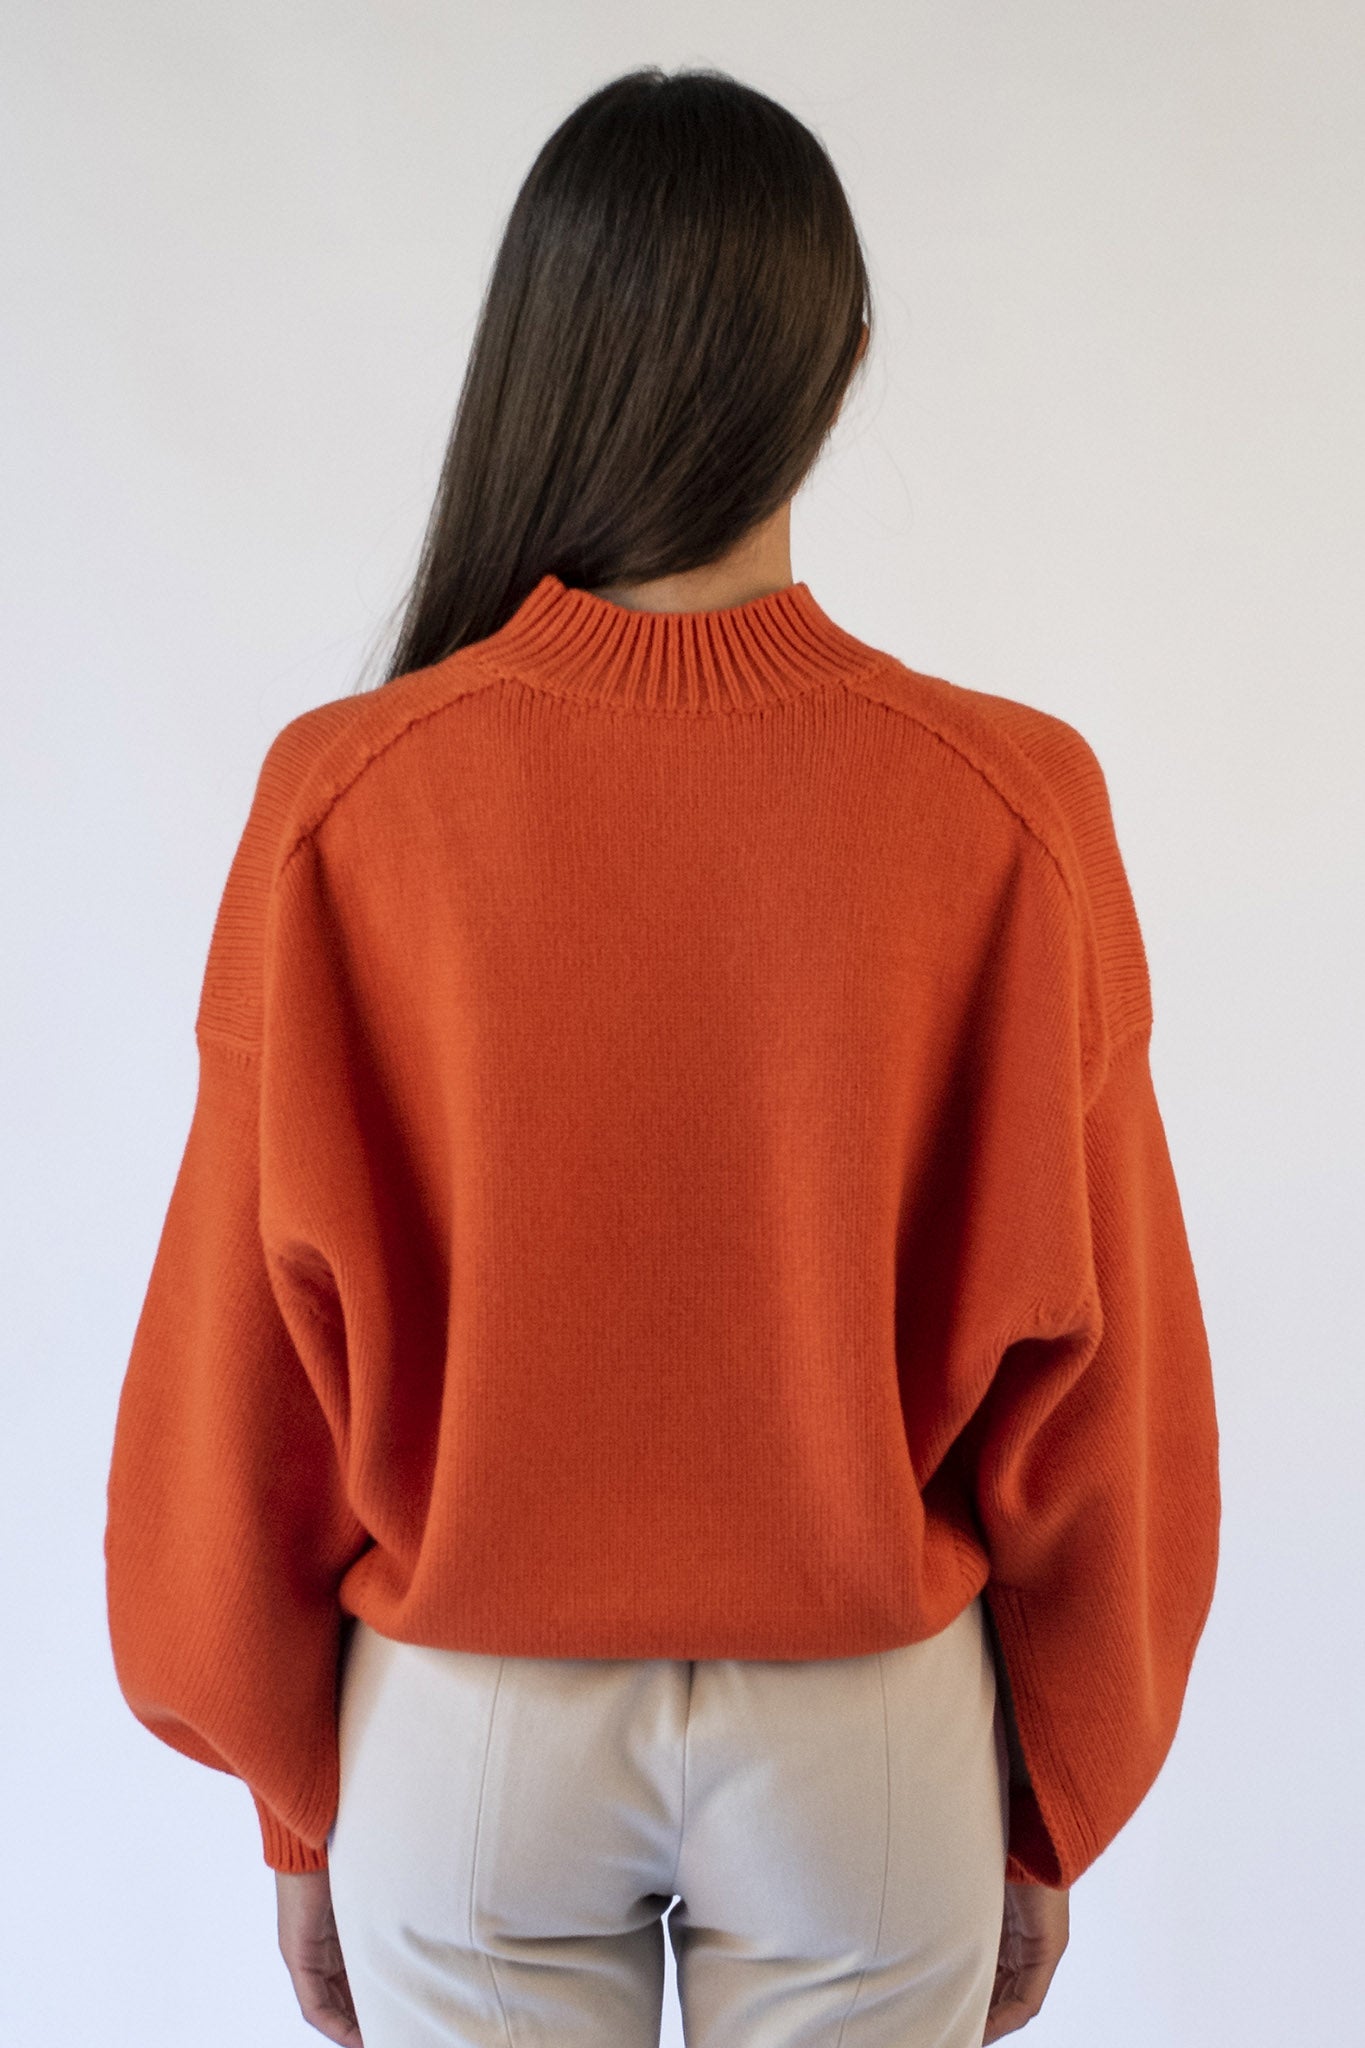 Orange turtleneck sweater with Isabella jewel buttons